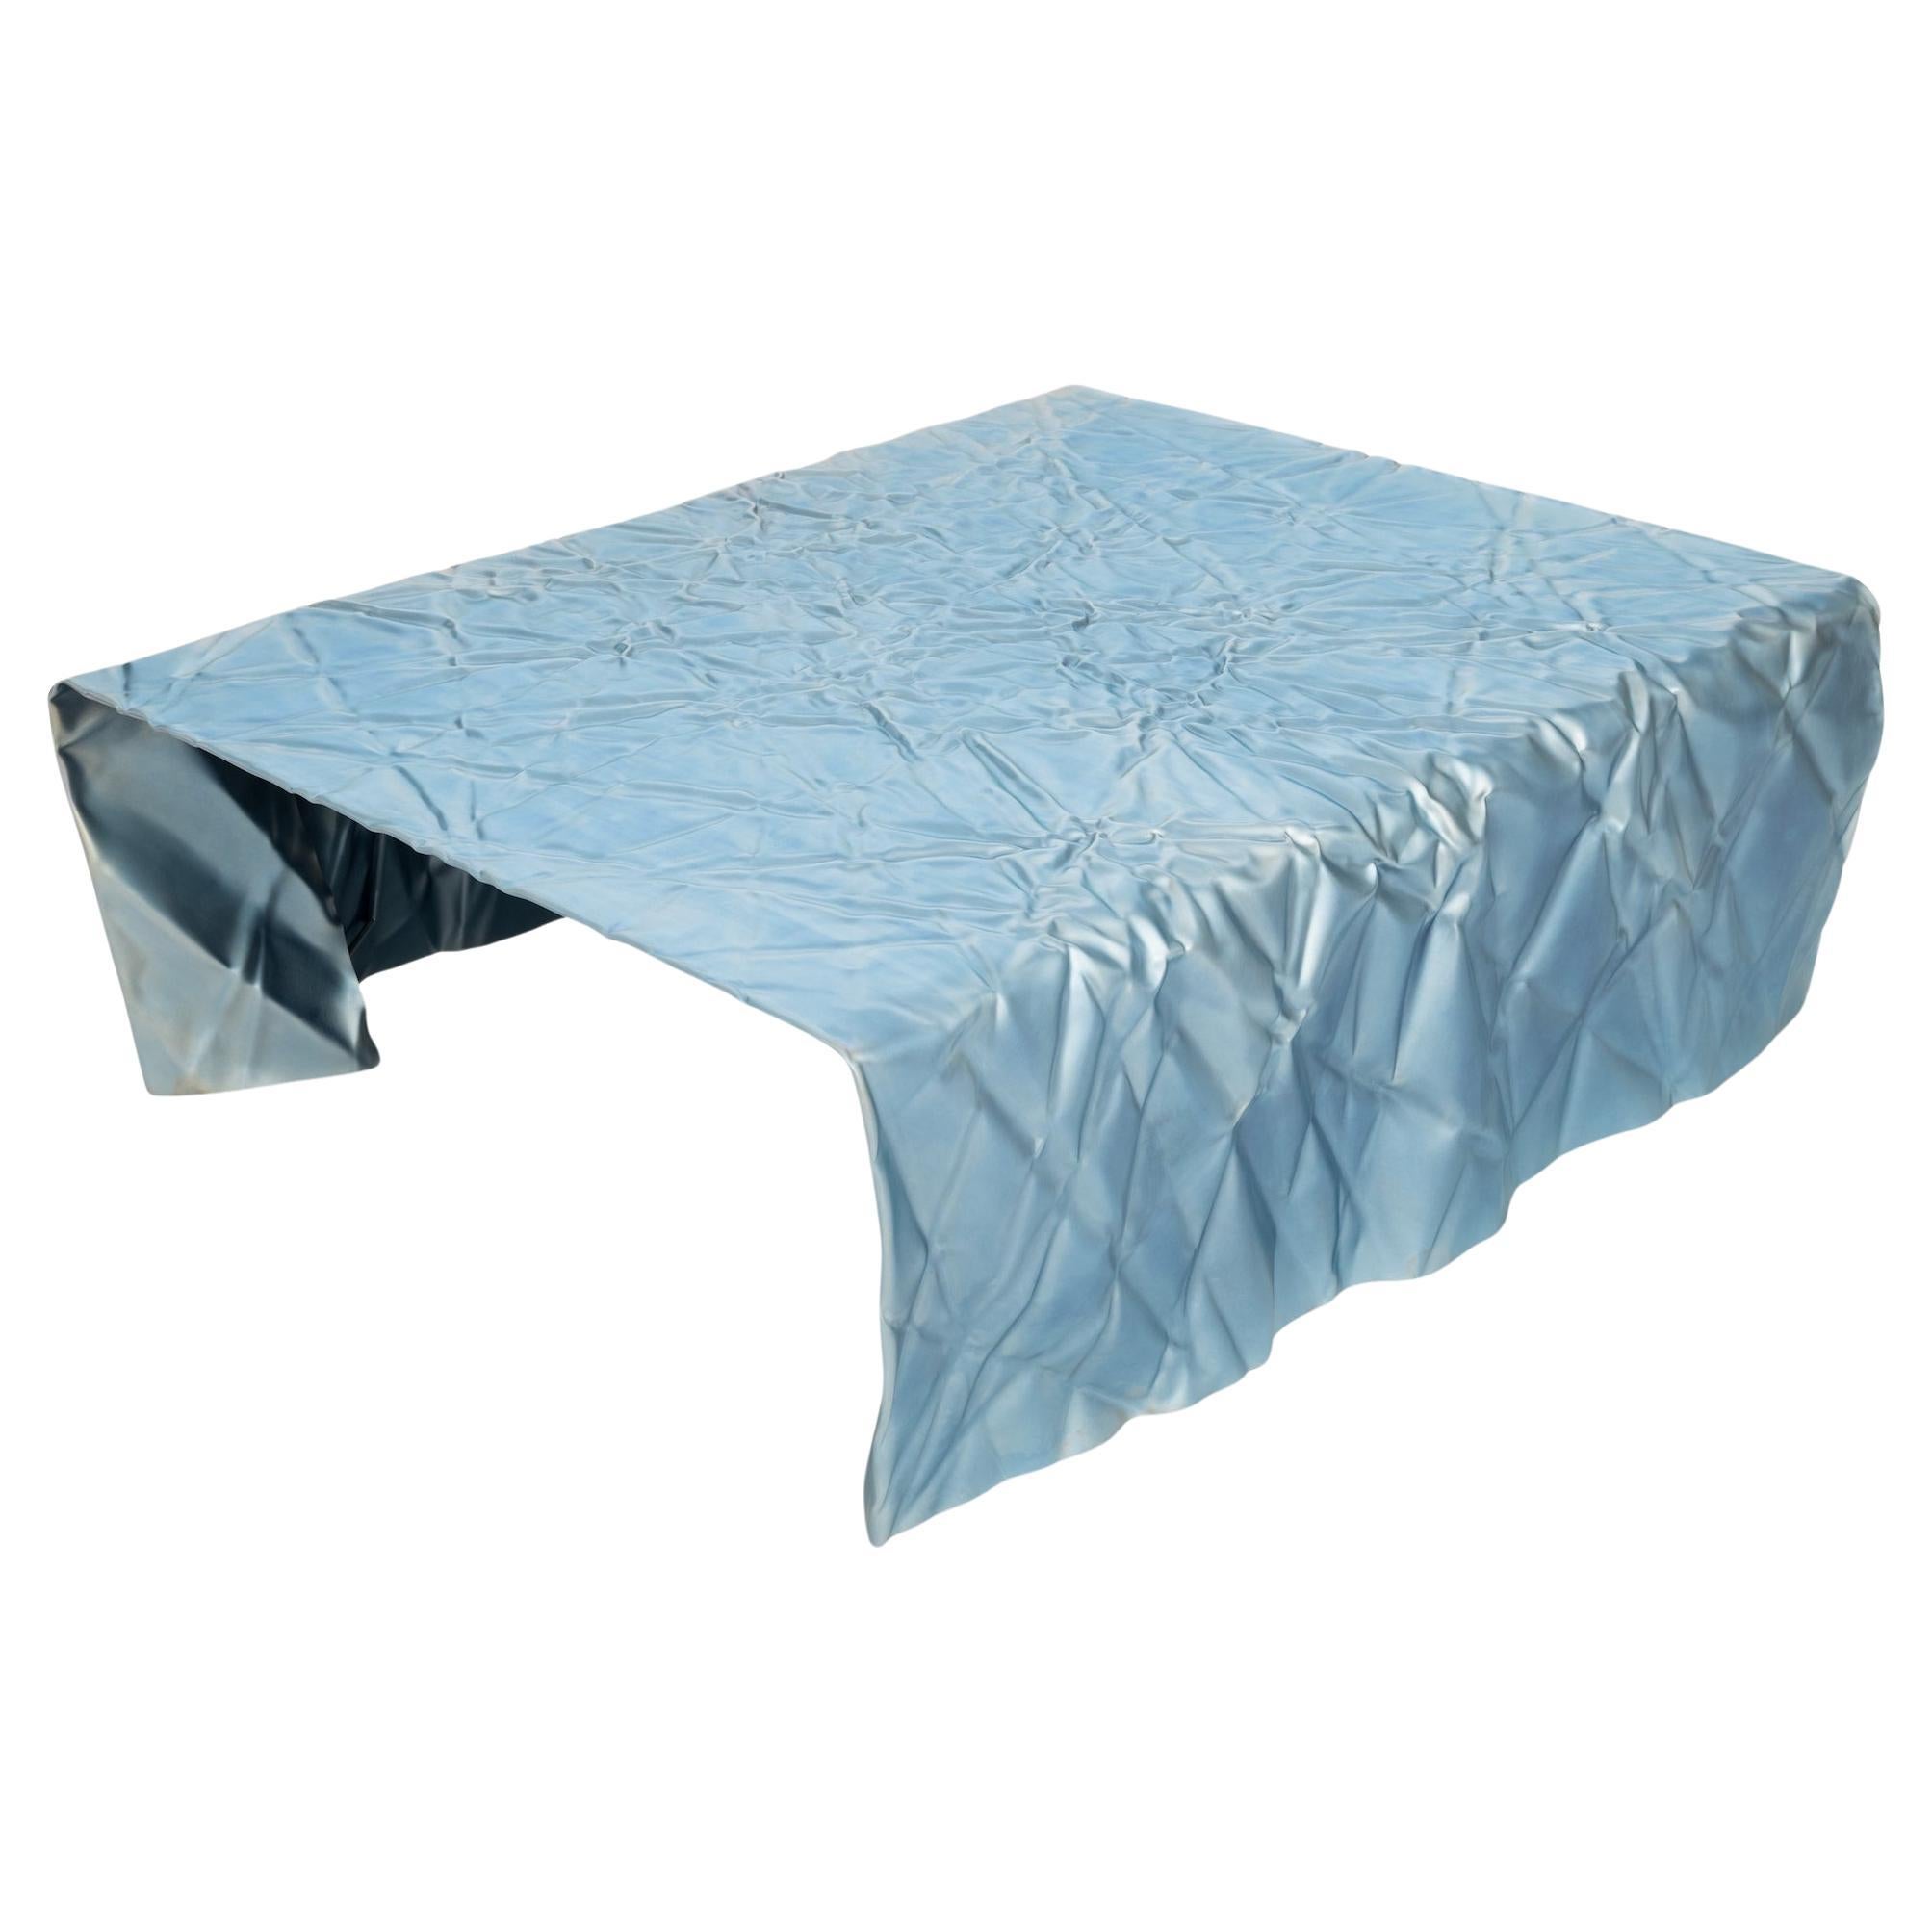 Christopher Prinz “Rectangular Wrinkled Coffee Table” in Raw Zinc Nickel Blue For Sale